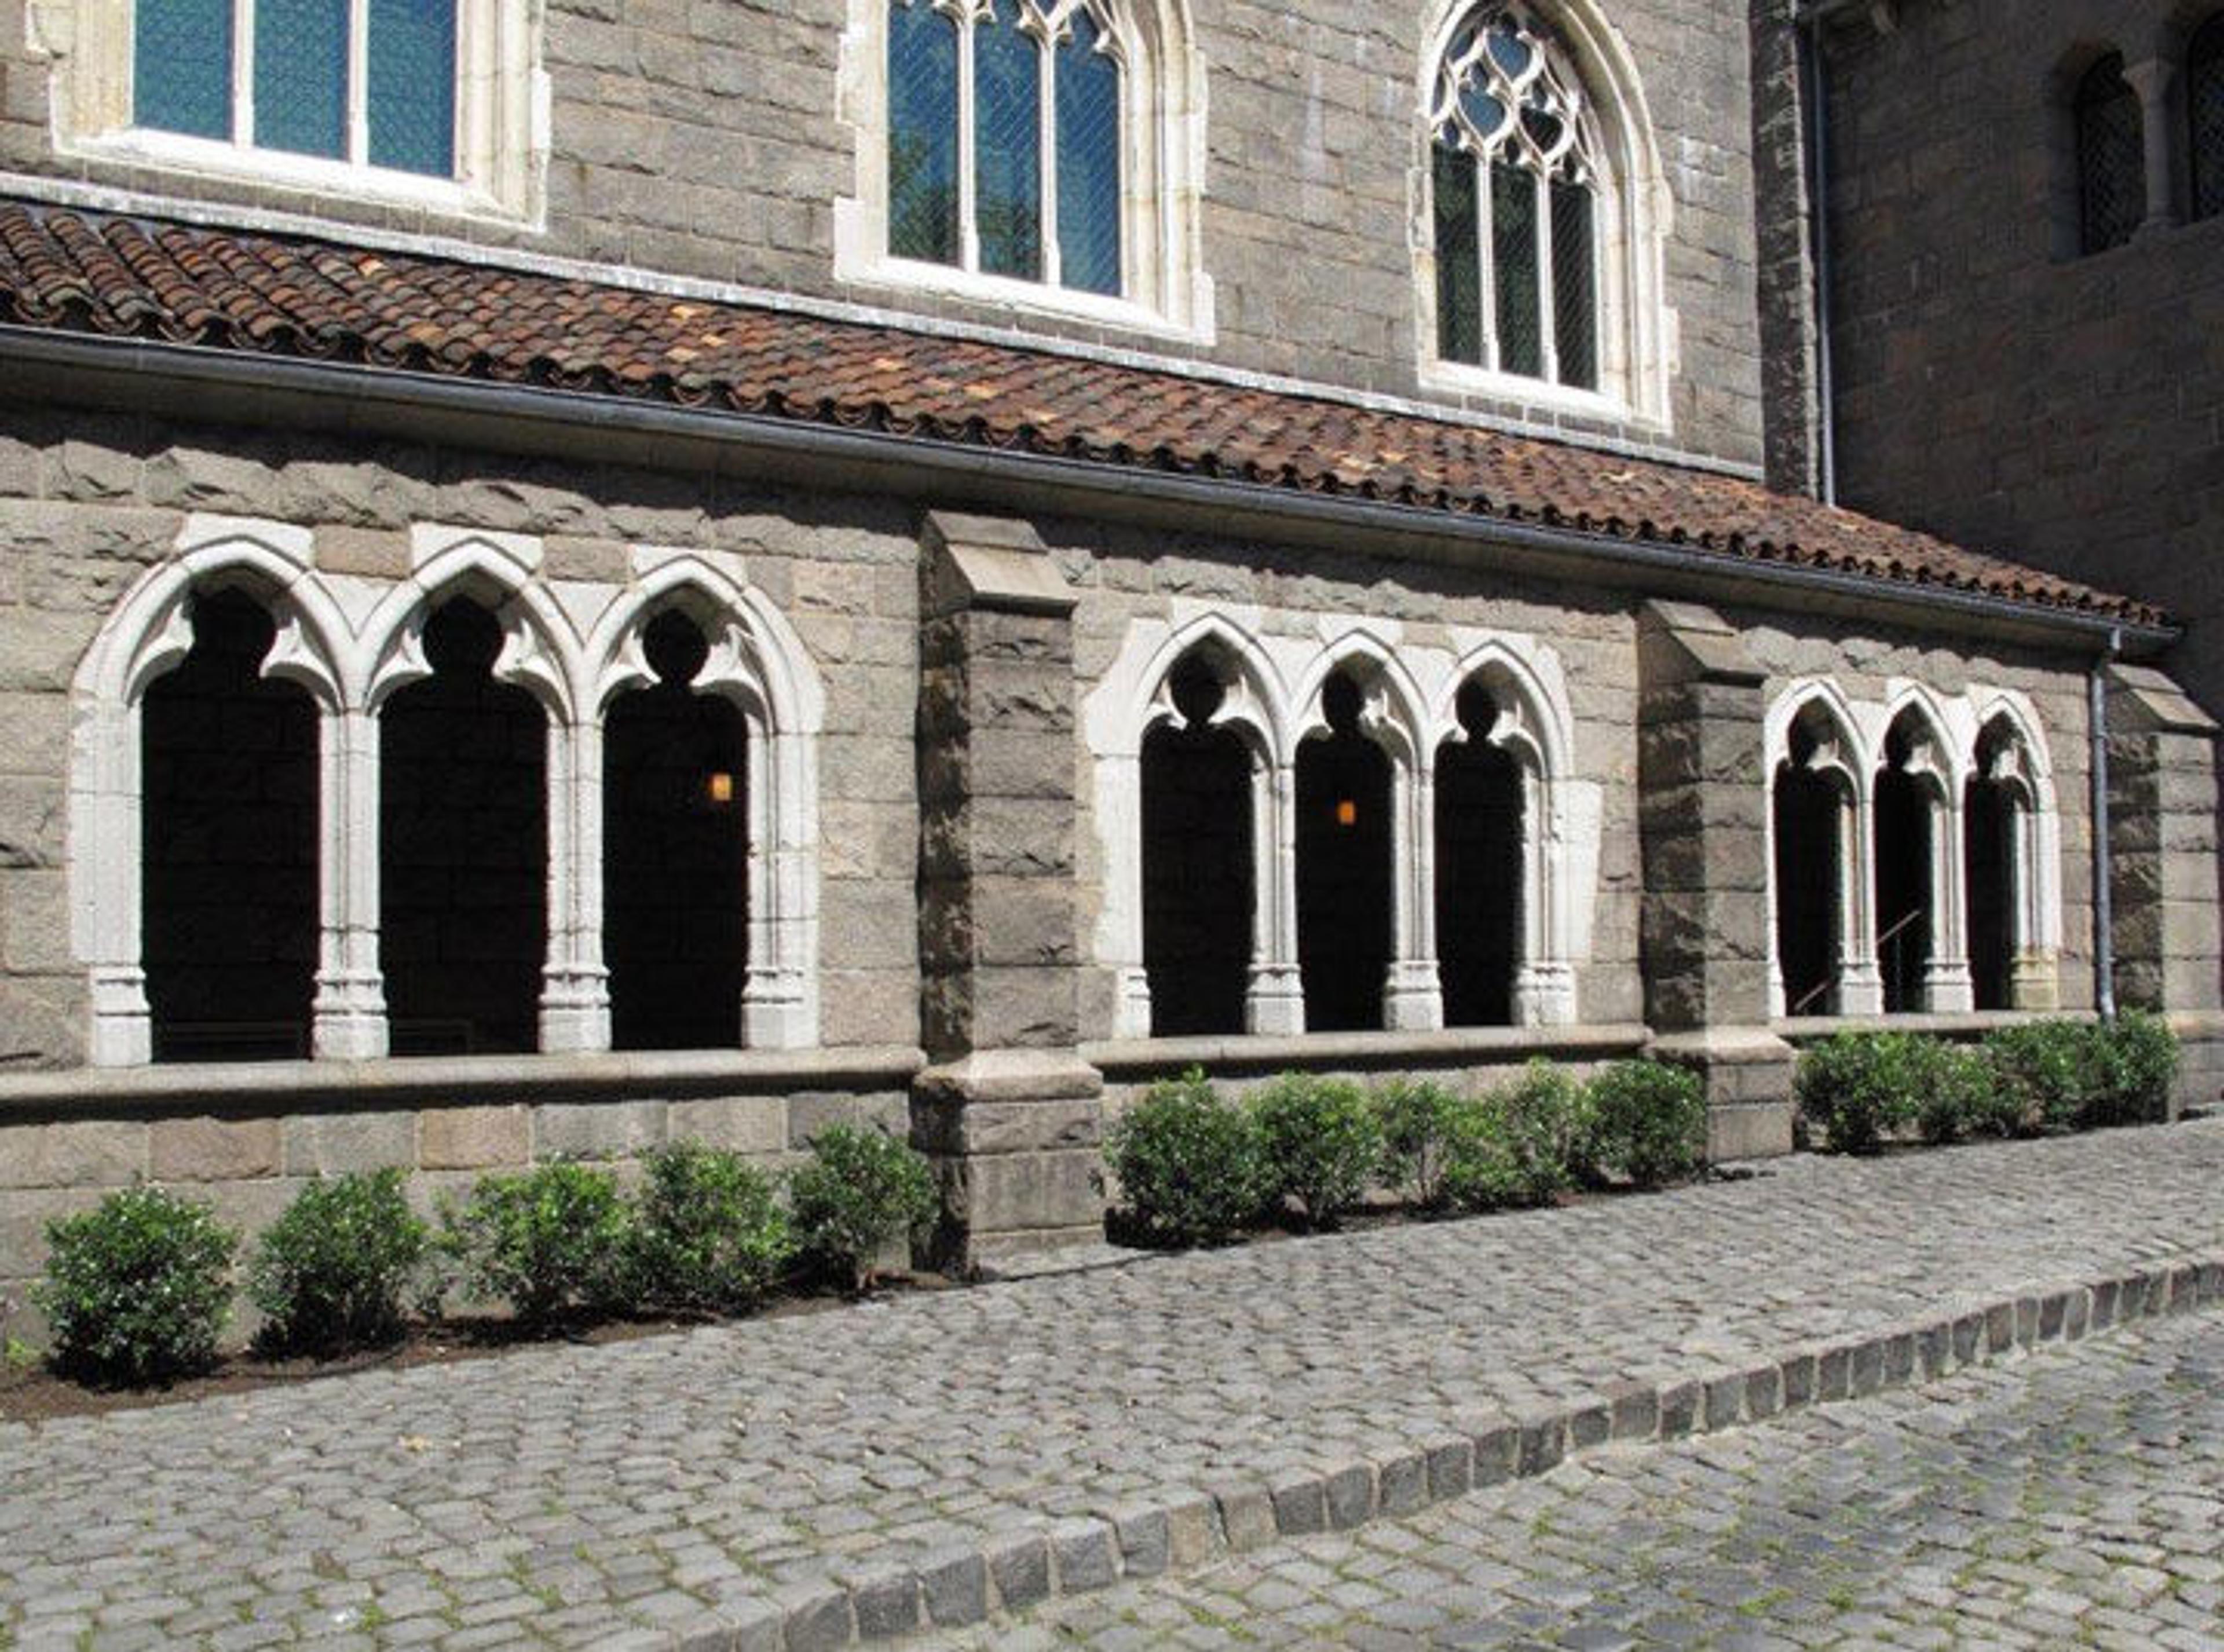 View of a 15th-century stone arcade as installed at The Met Cloisters